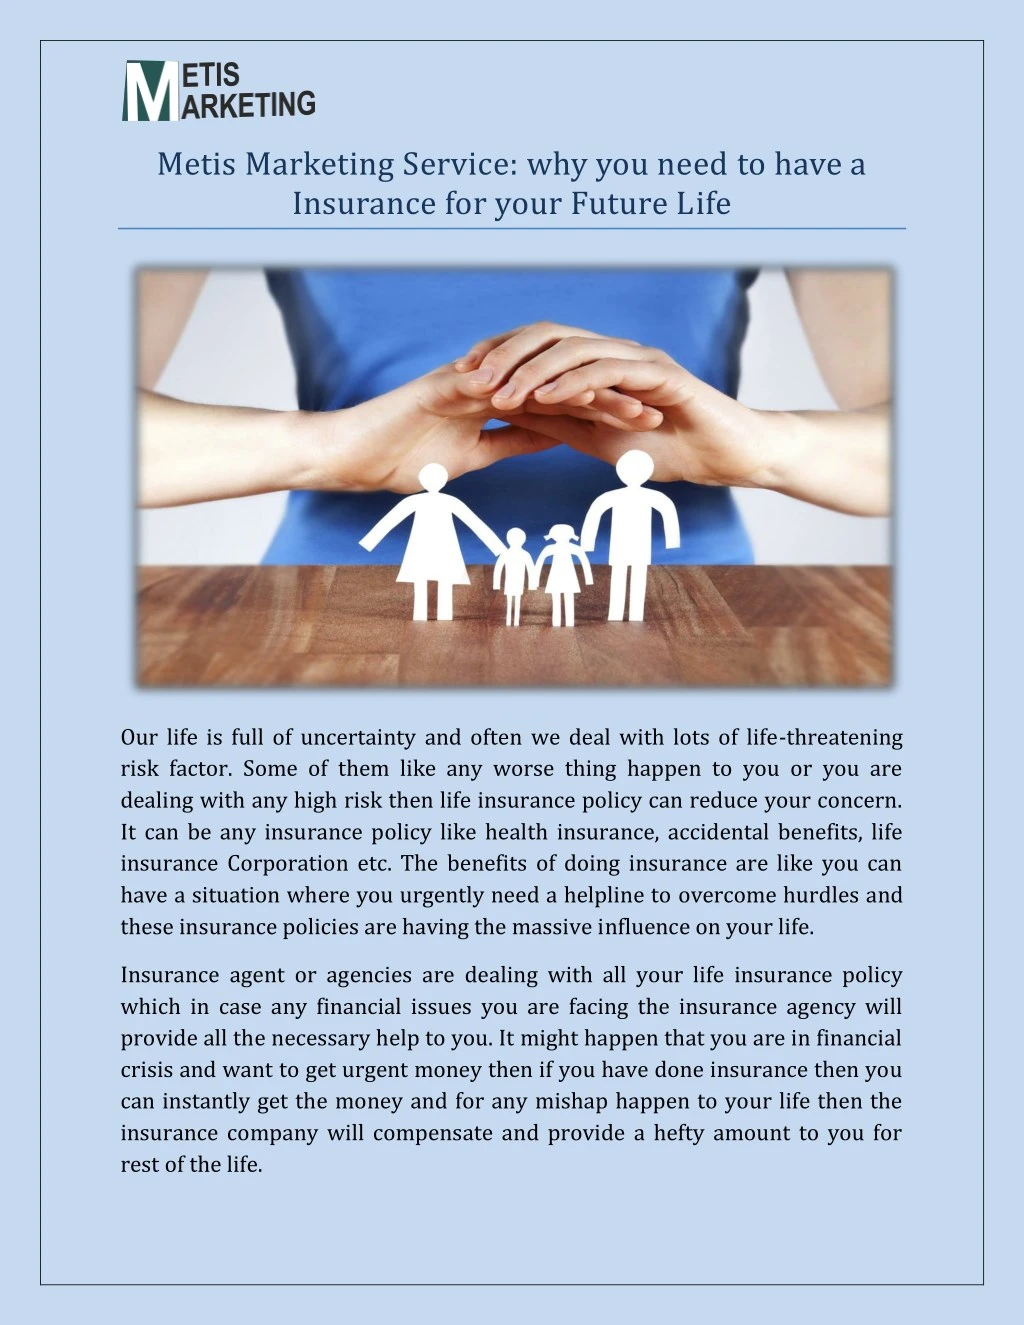 metis marketing service why you need to have